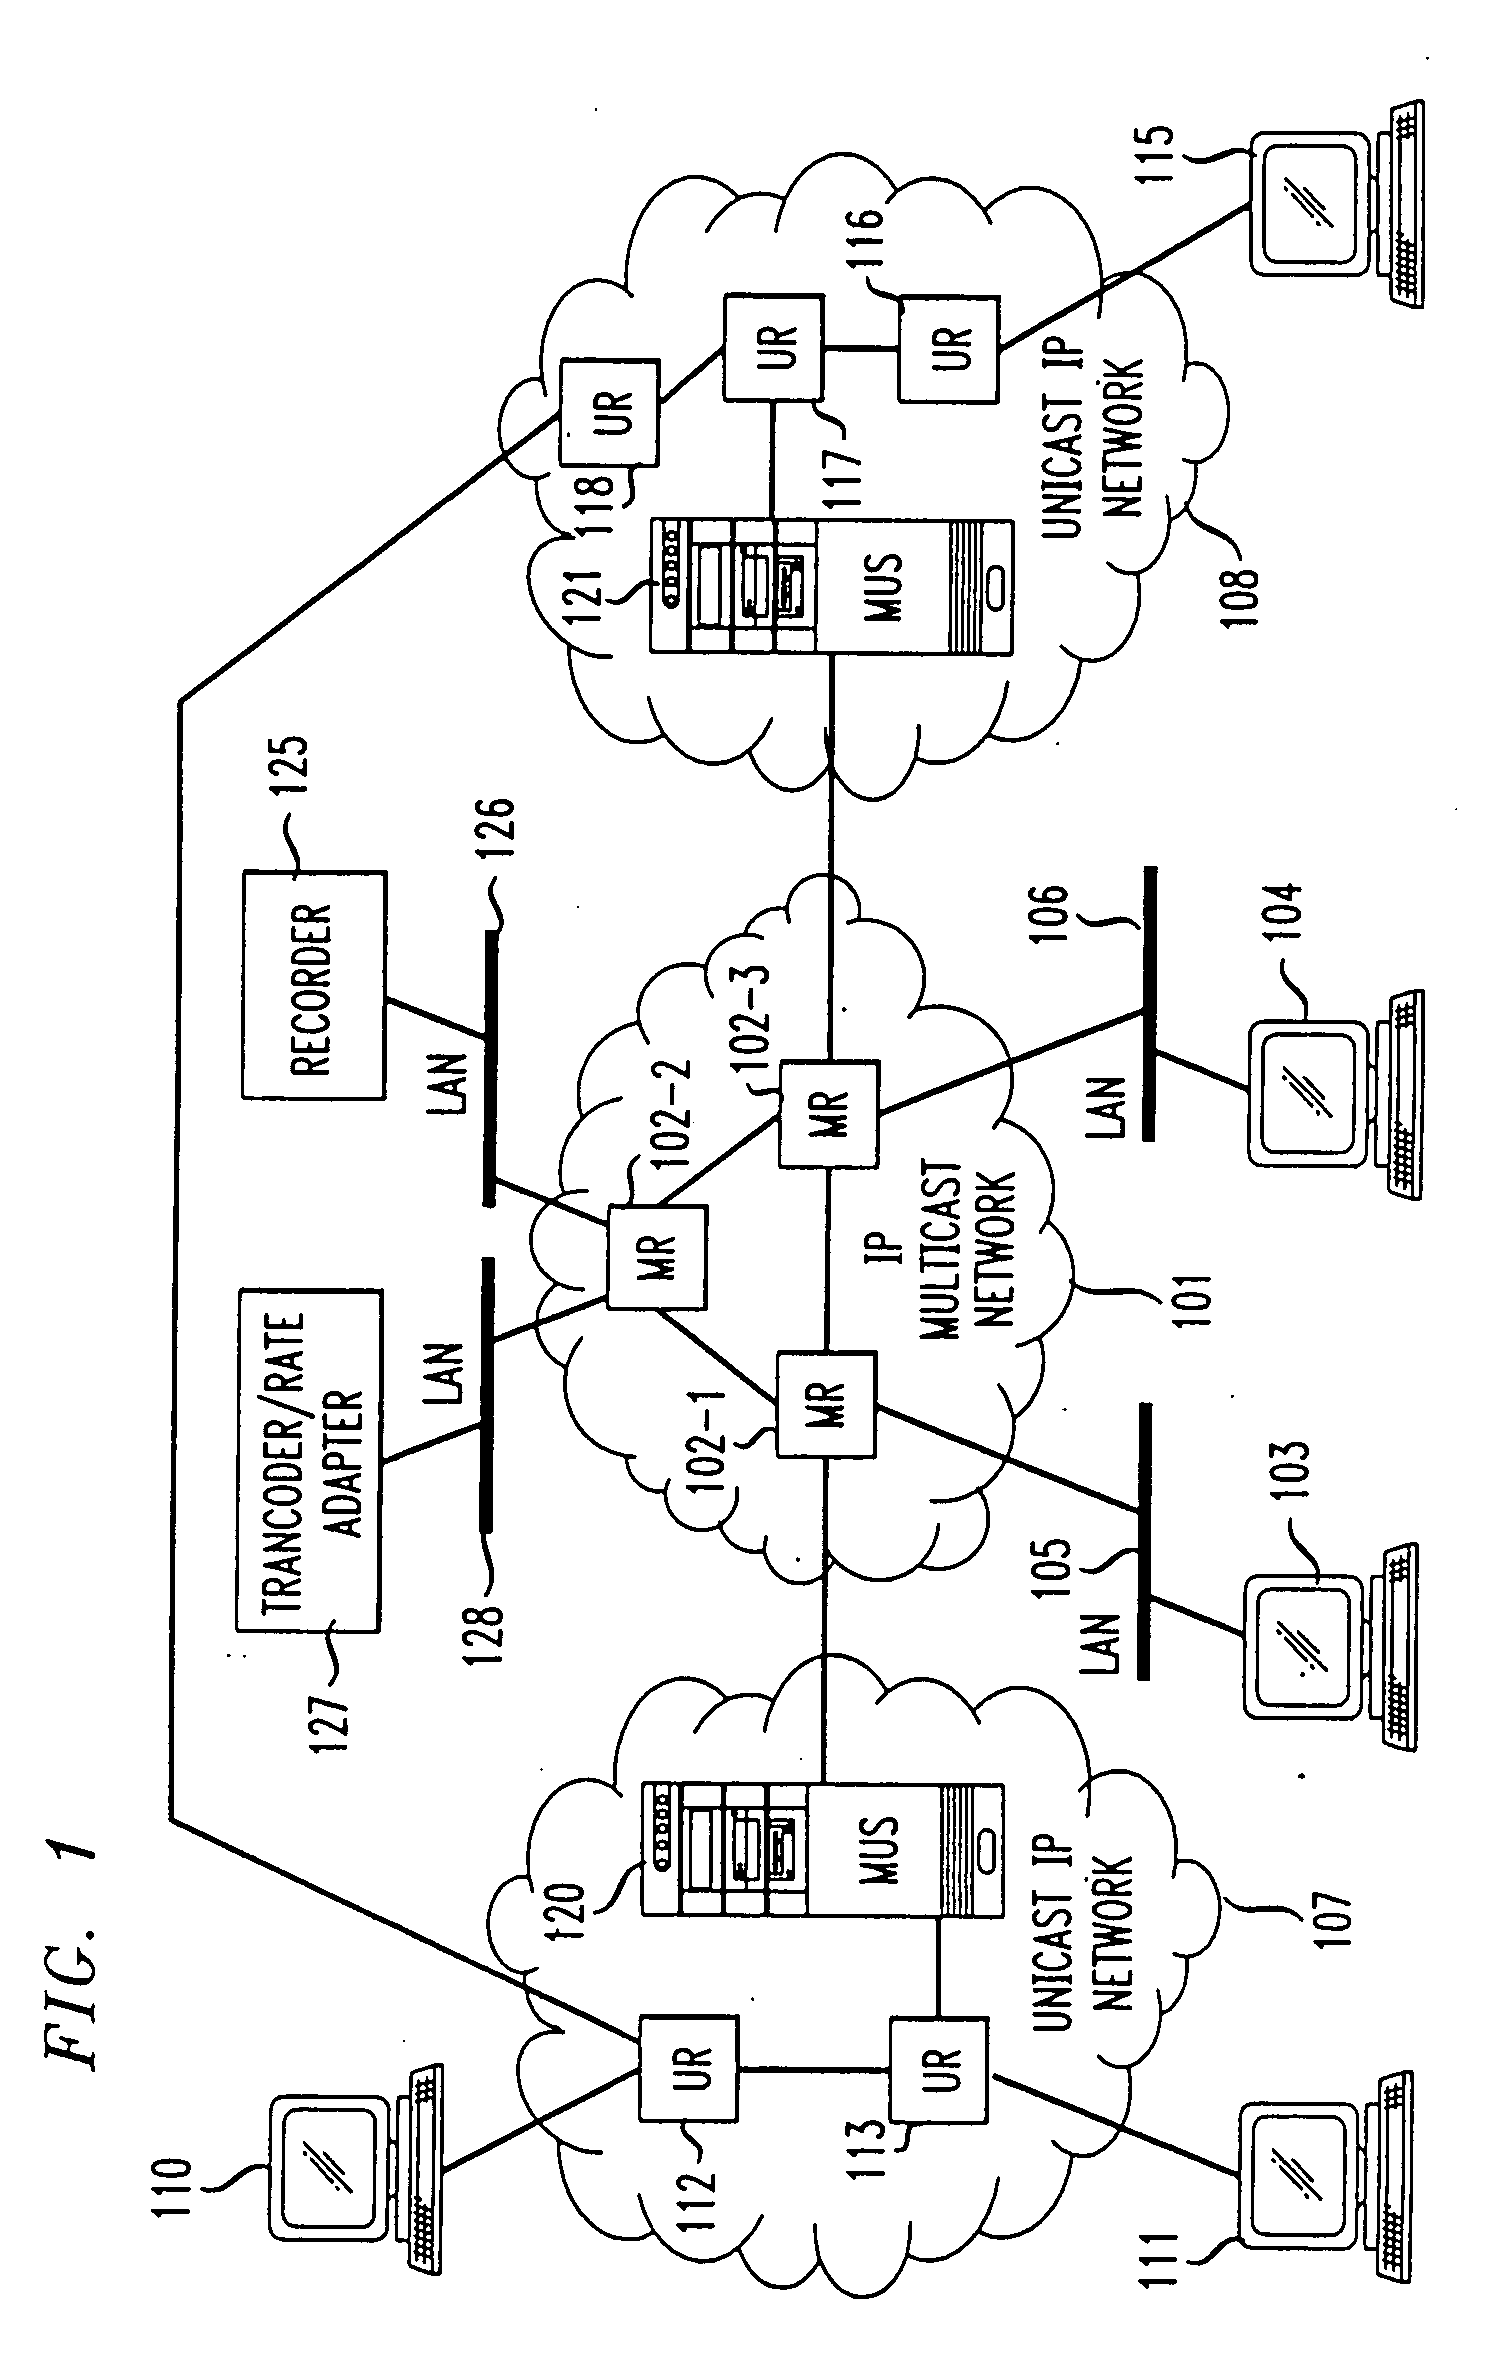 Method and system for a Unicast endpoint client to access a Multicast internet protocol (IP) session